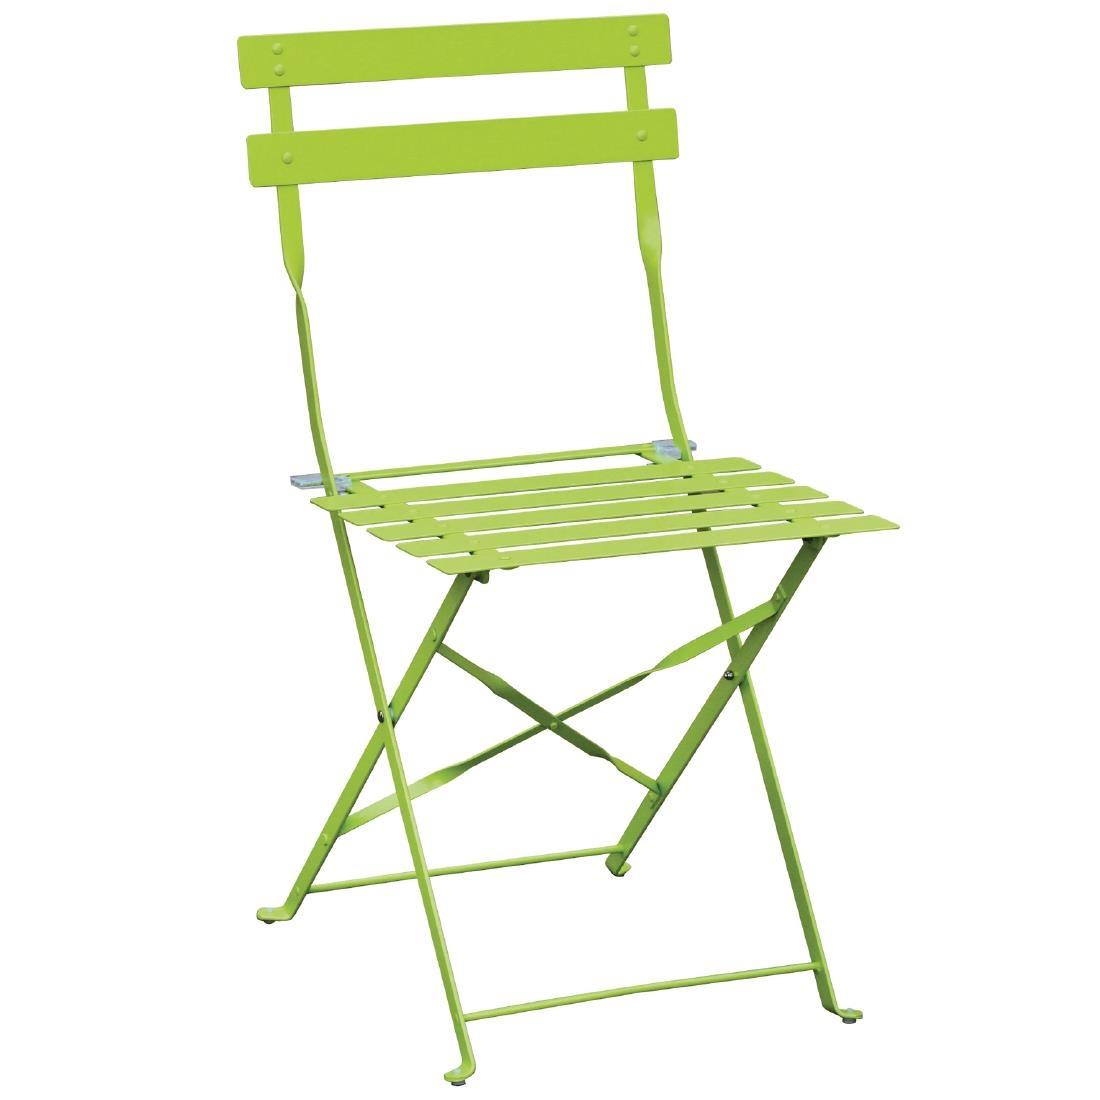 Bolero Green Pavement Style Steel Folding Chairs (Pack of 2) - GH552  - 1